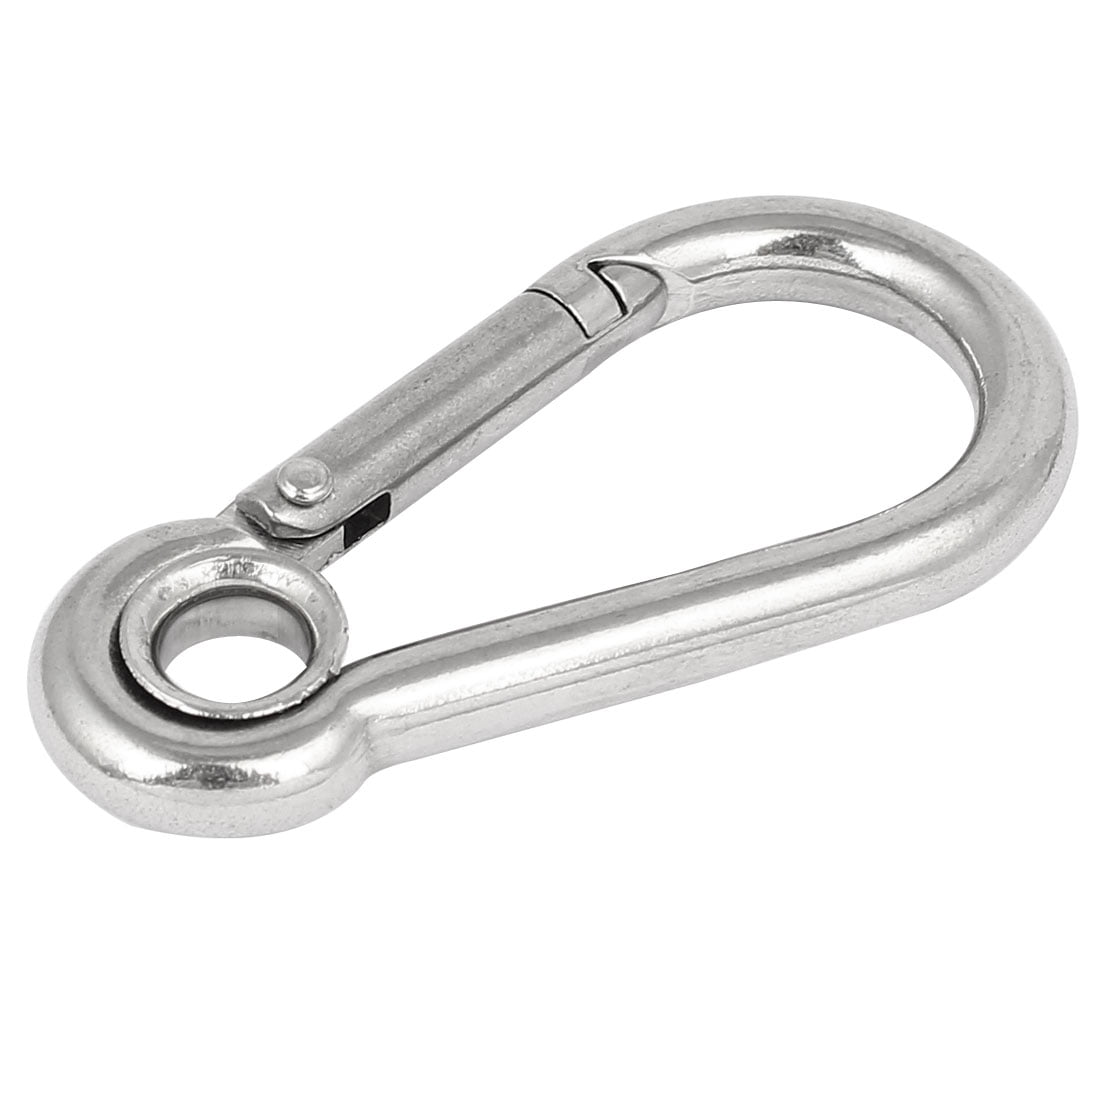 4Pcs 50mm Lobster Stainless Steel Climbing Carabiner Spring Clip Snap Hook 